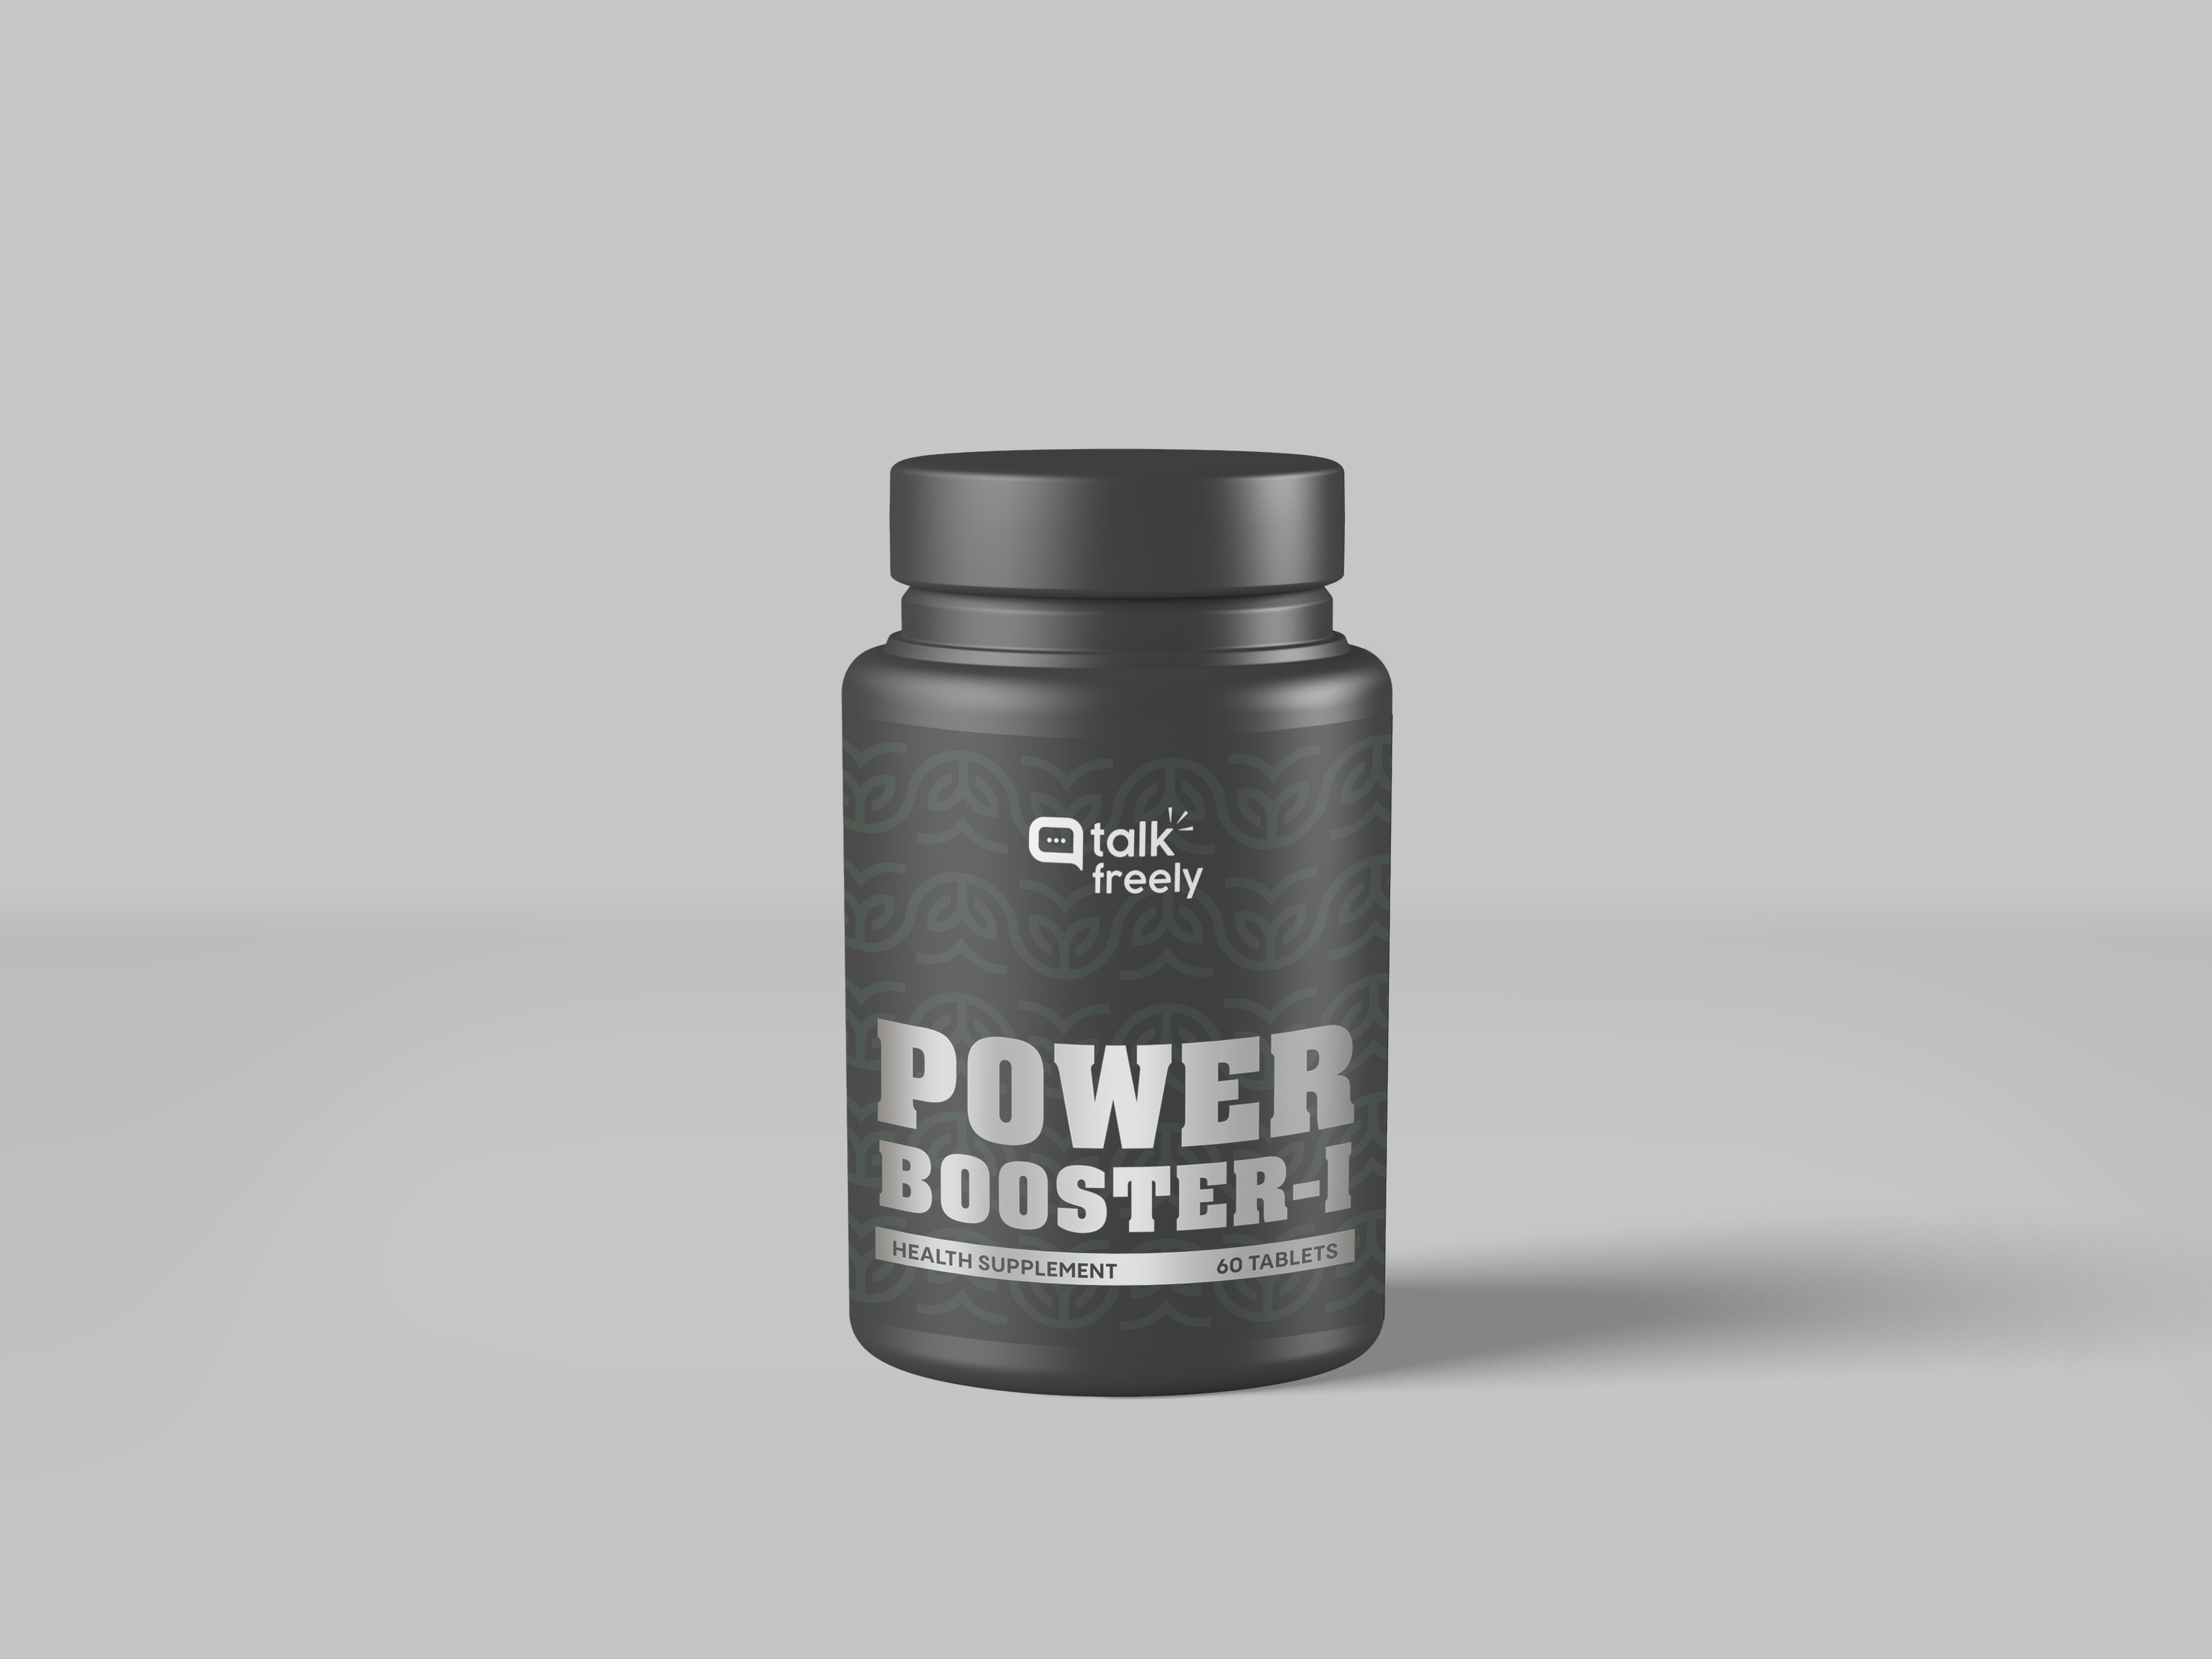 Power Booster I